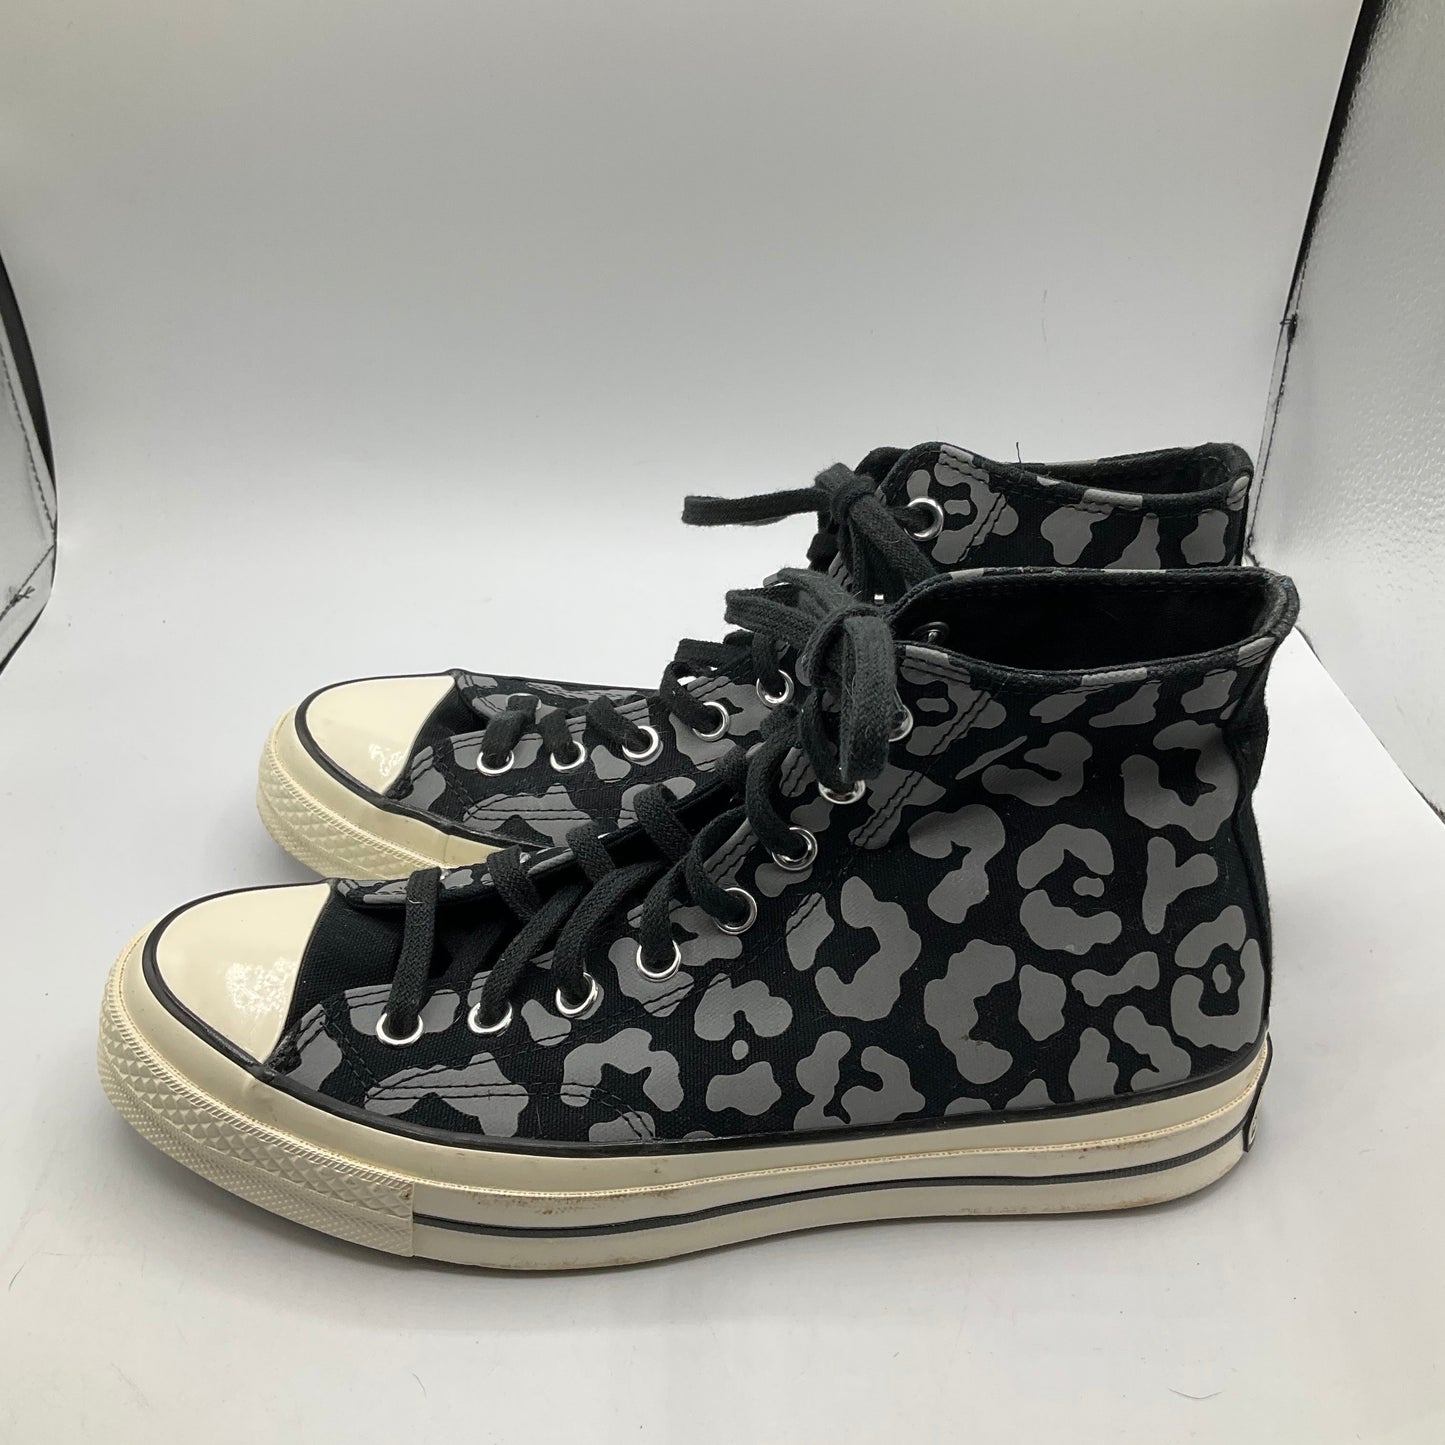 Black Shoes Sneakers Converse, Size 8